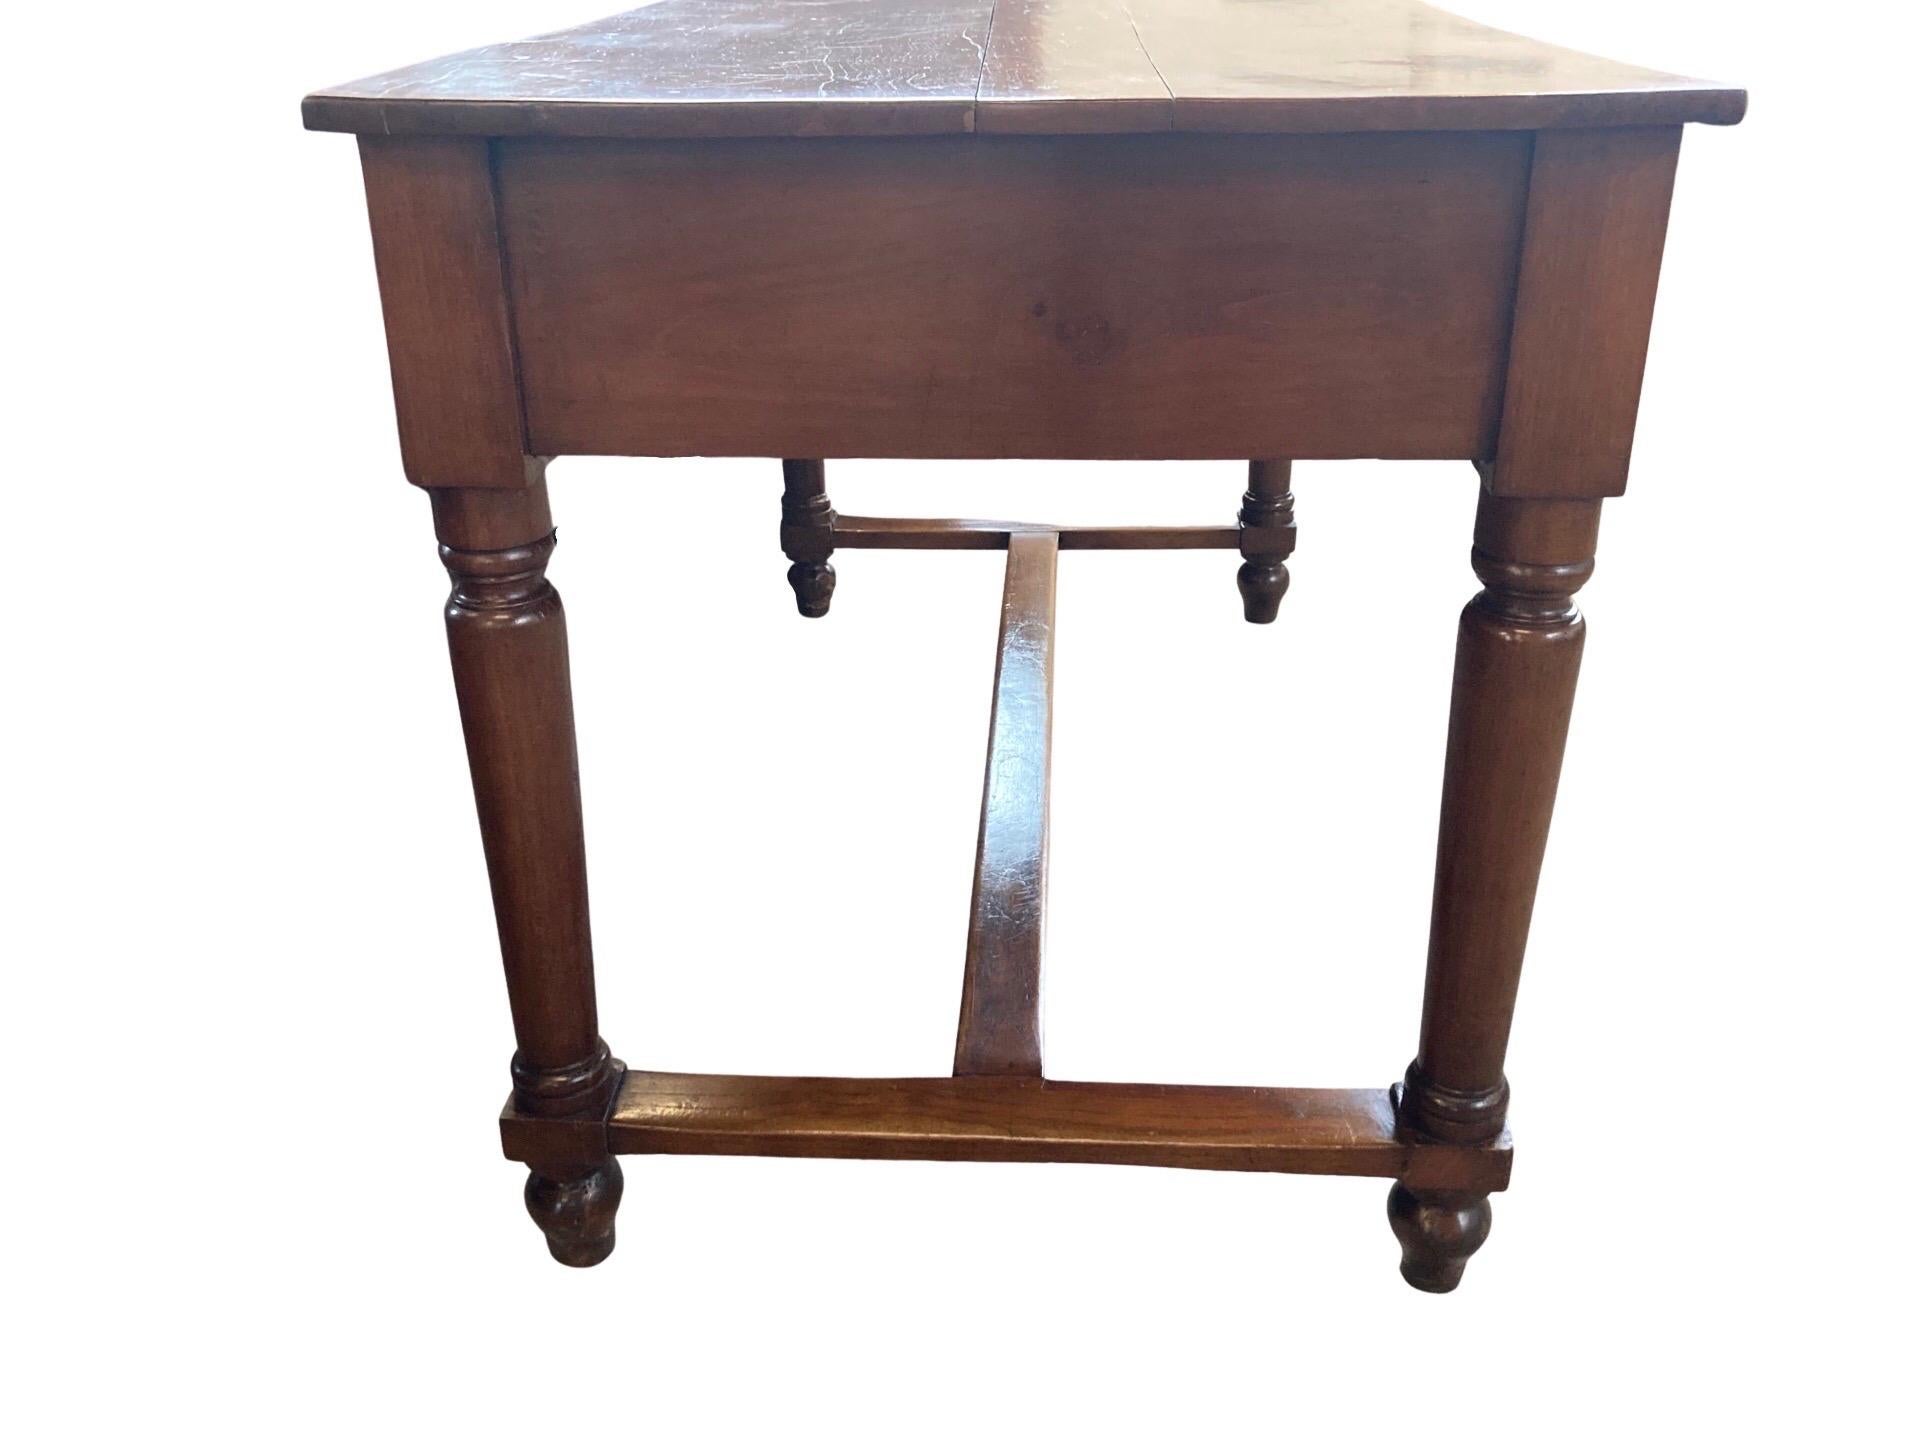 Kitchen table hand-crafted in Central Italy in the early 1800s using walnut and pegged construction. The table has a beautiful warm, deep amber color and features a single drawer inset on the front of the flat apron. The drawer shows beautiful